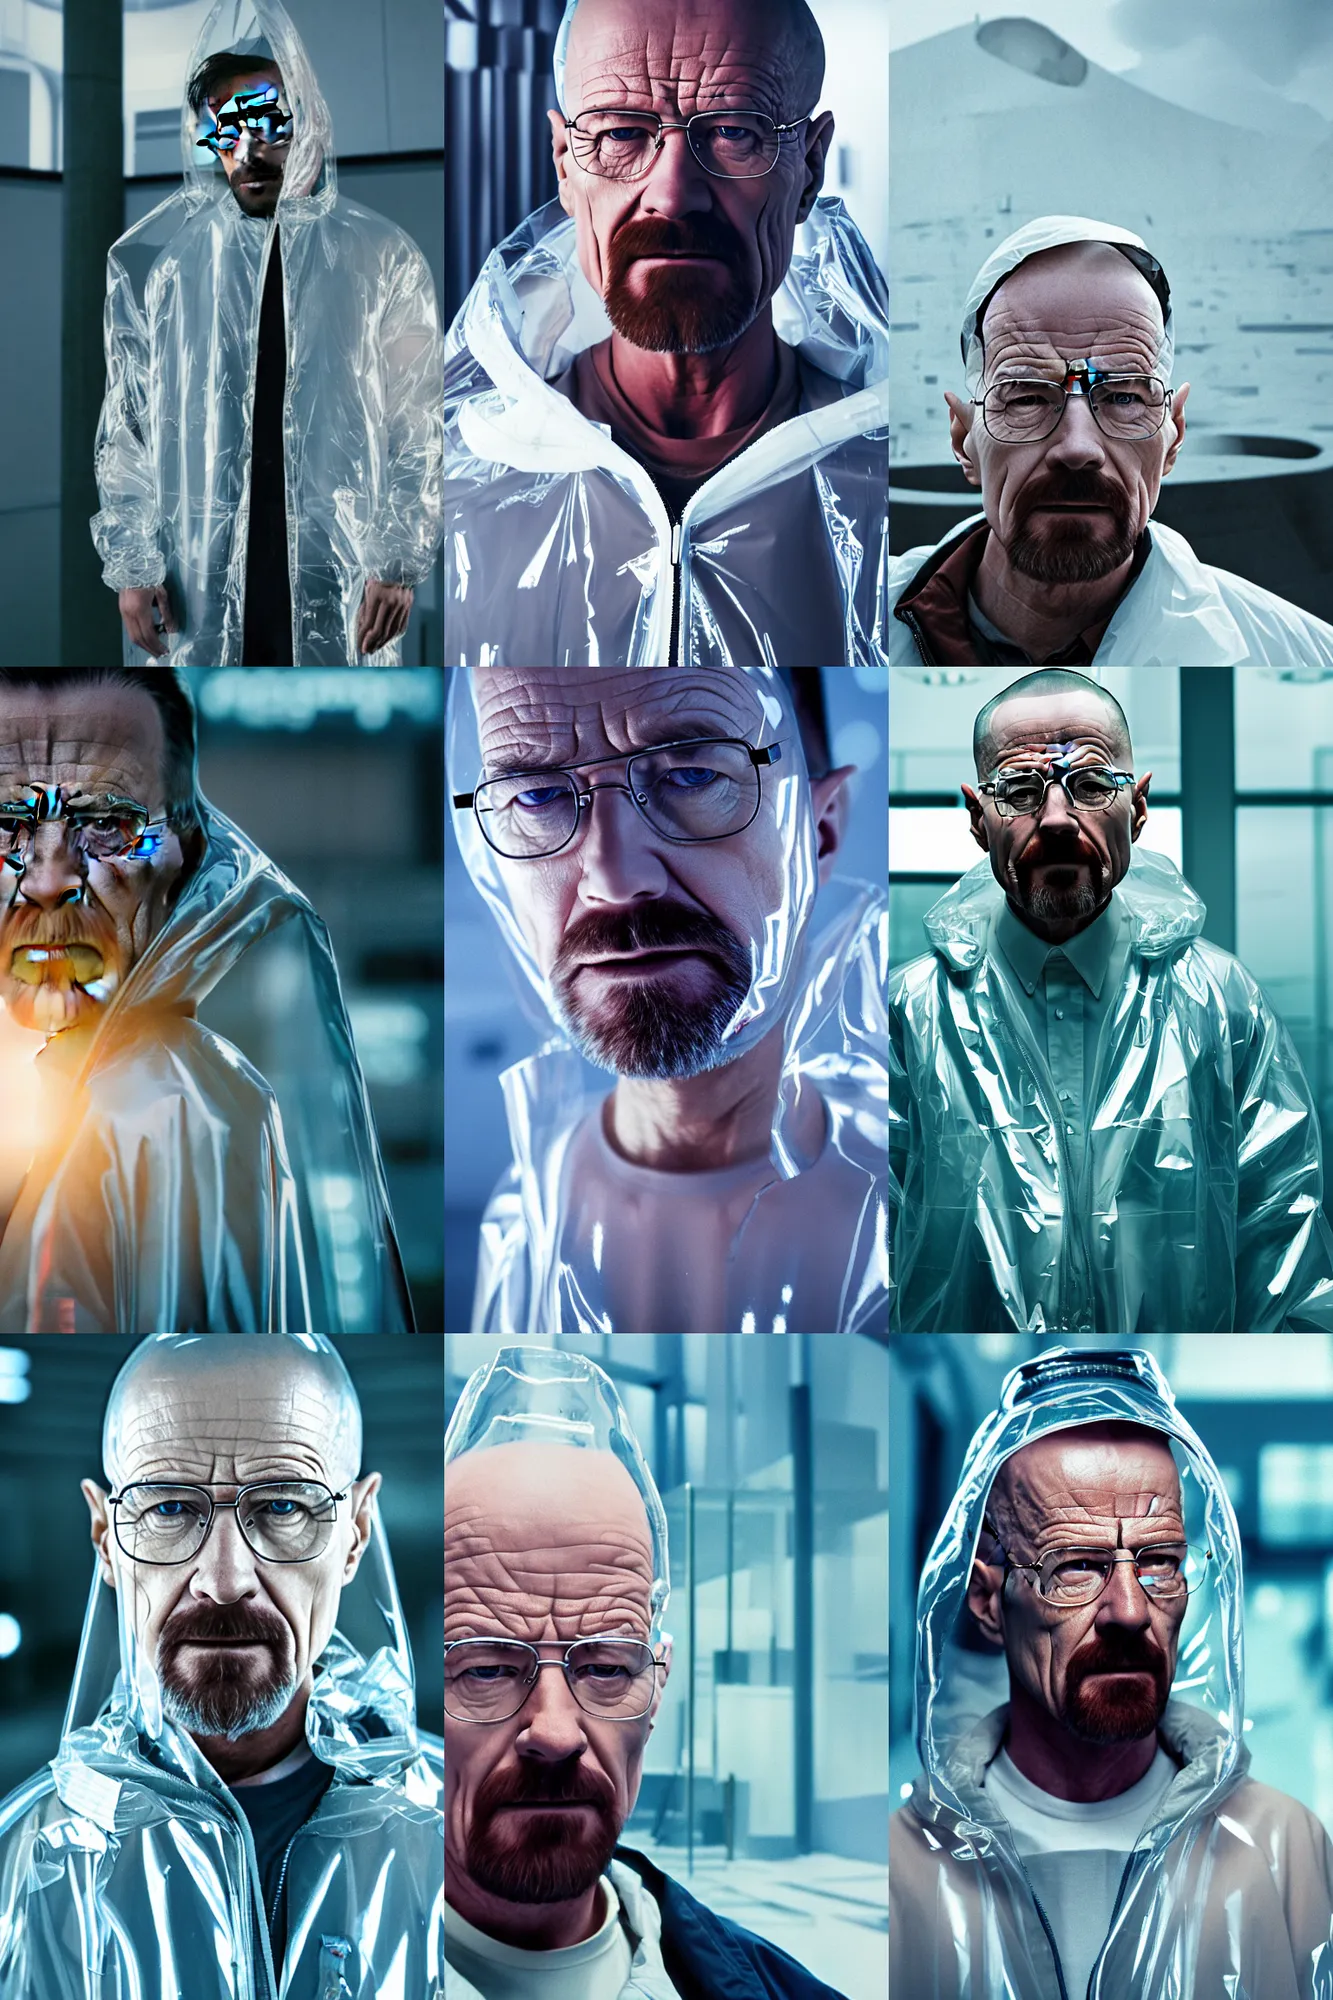 Walter White's Safety Goggles and Respirator - Breaking Bad